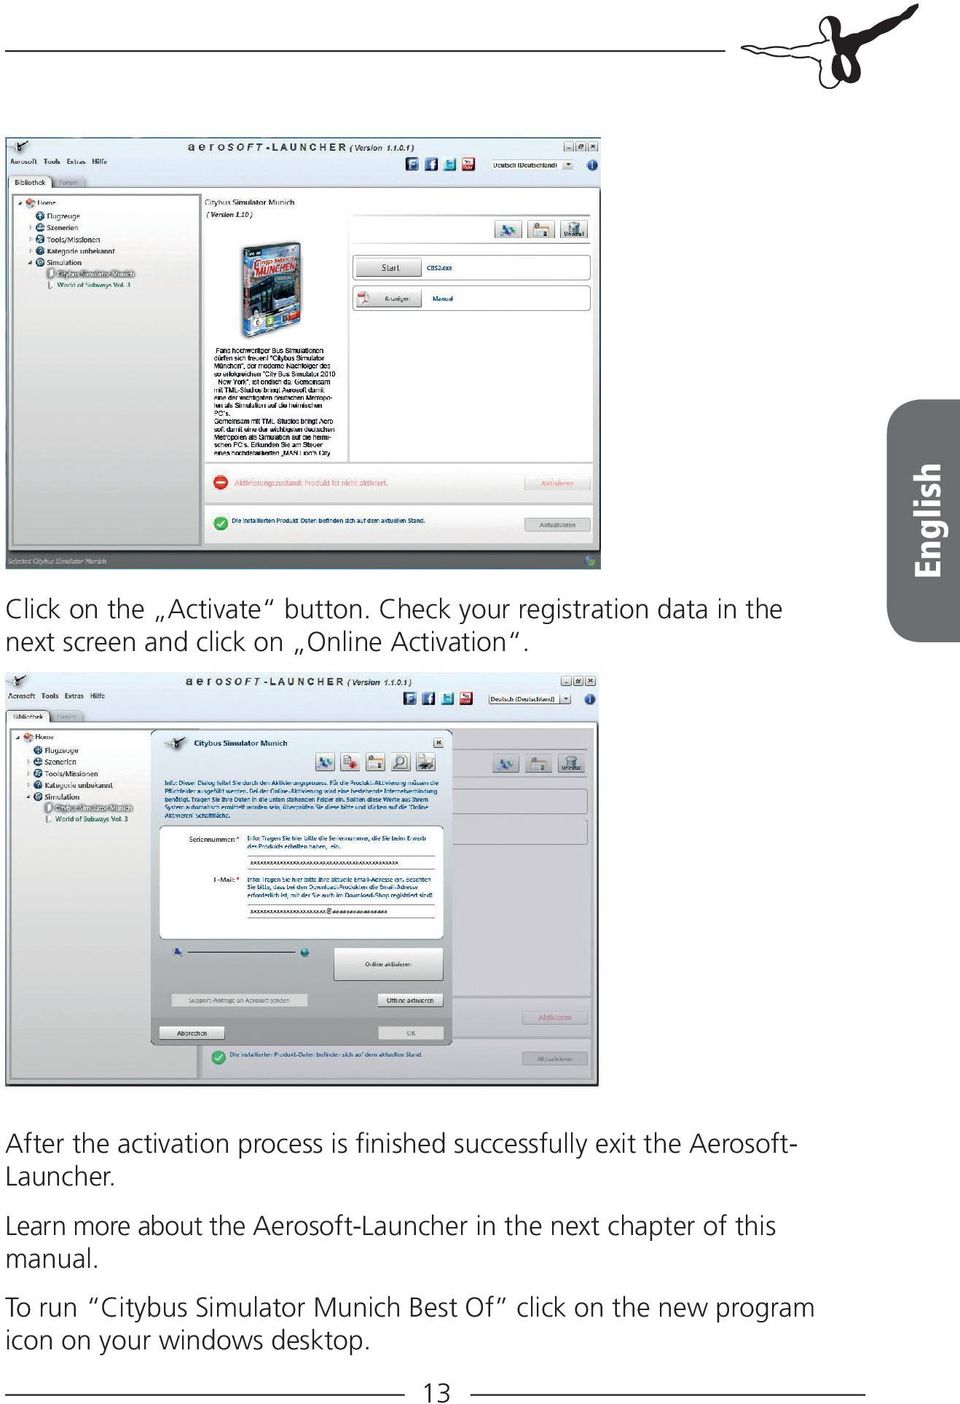 English After the activation process is finished successfully exit the Aerosoft- Launcher.